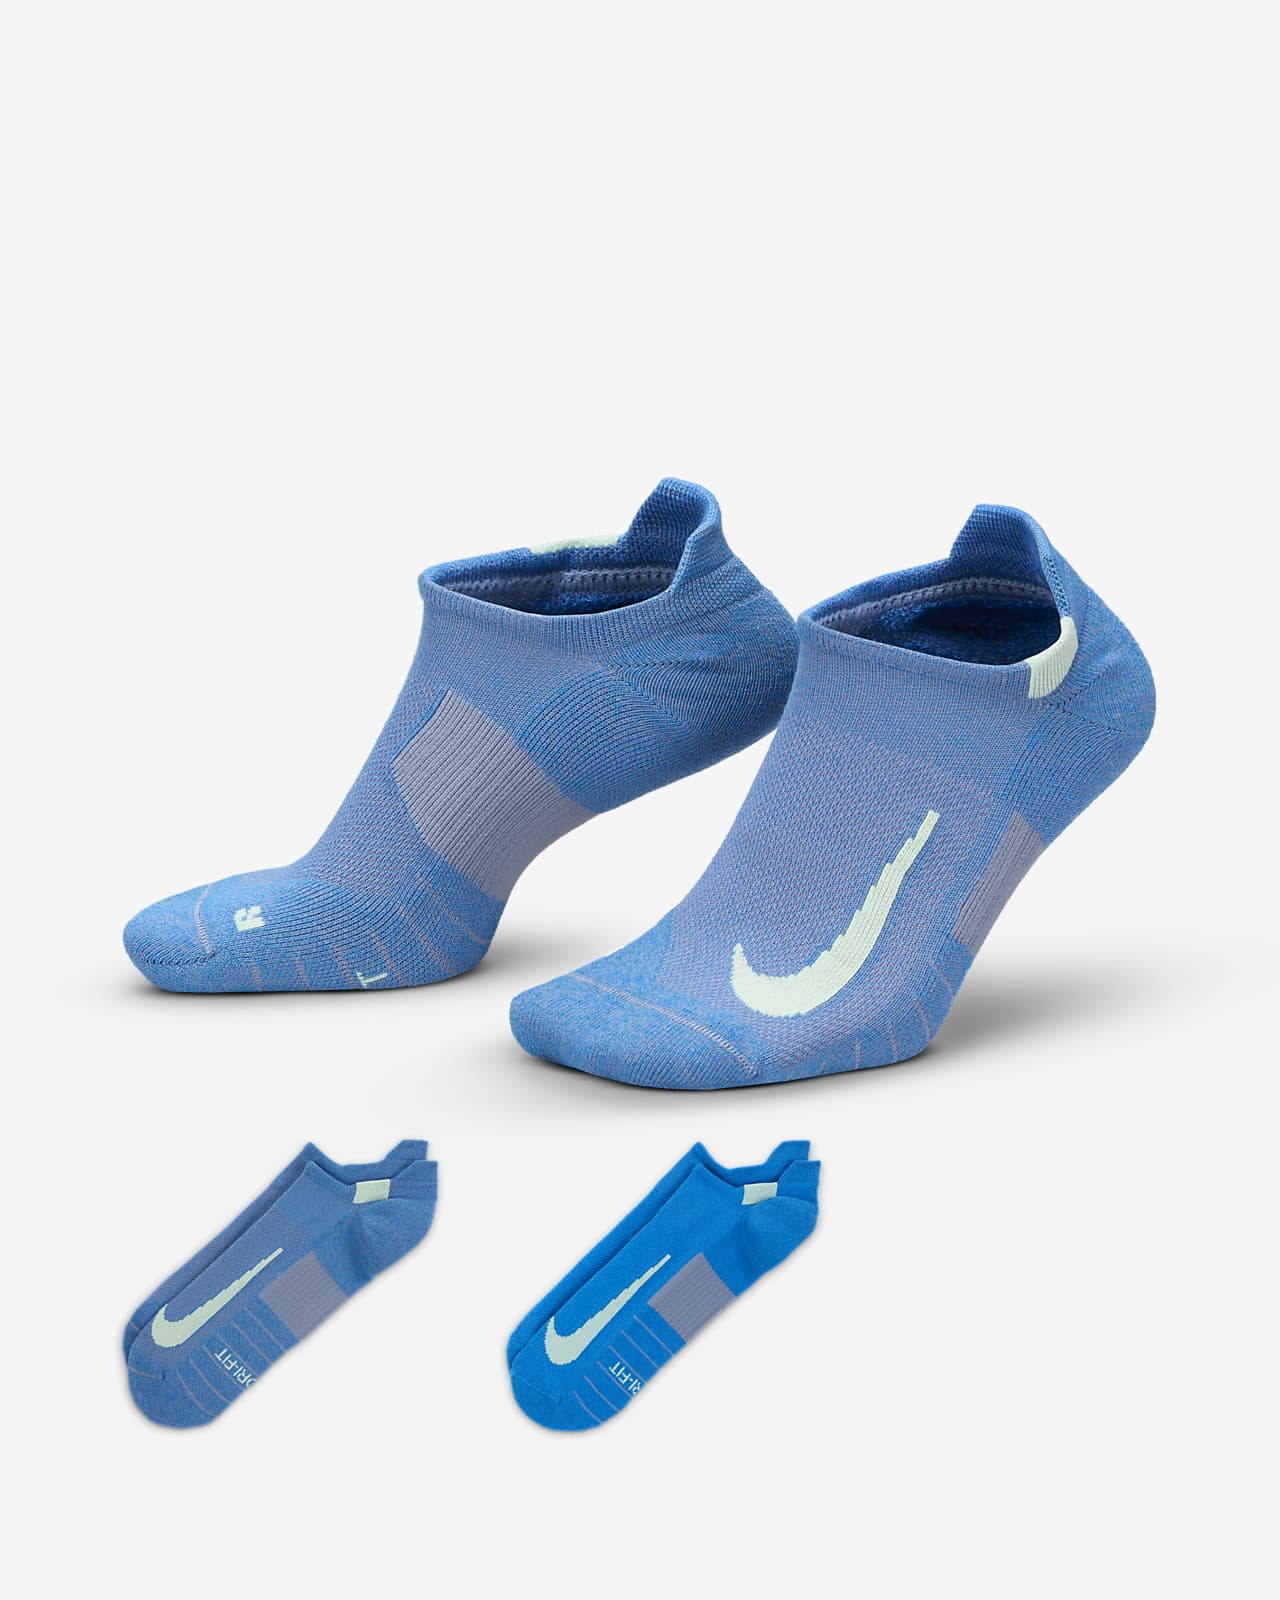 Chaussettes de running invisibles Nike Multiplier (2 paires)